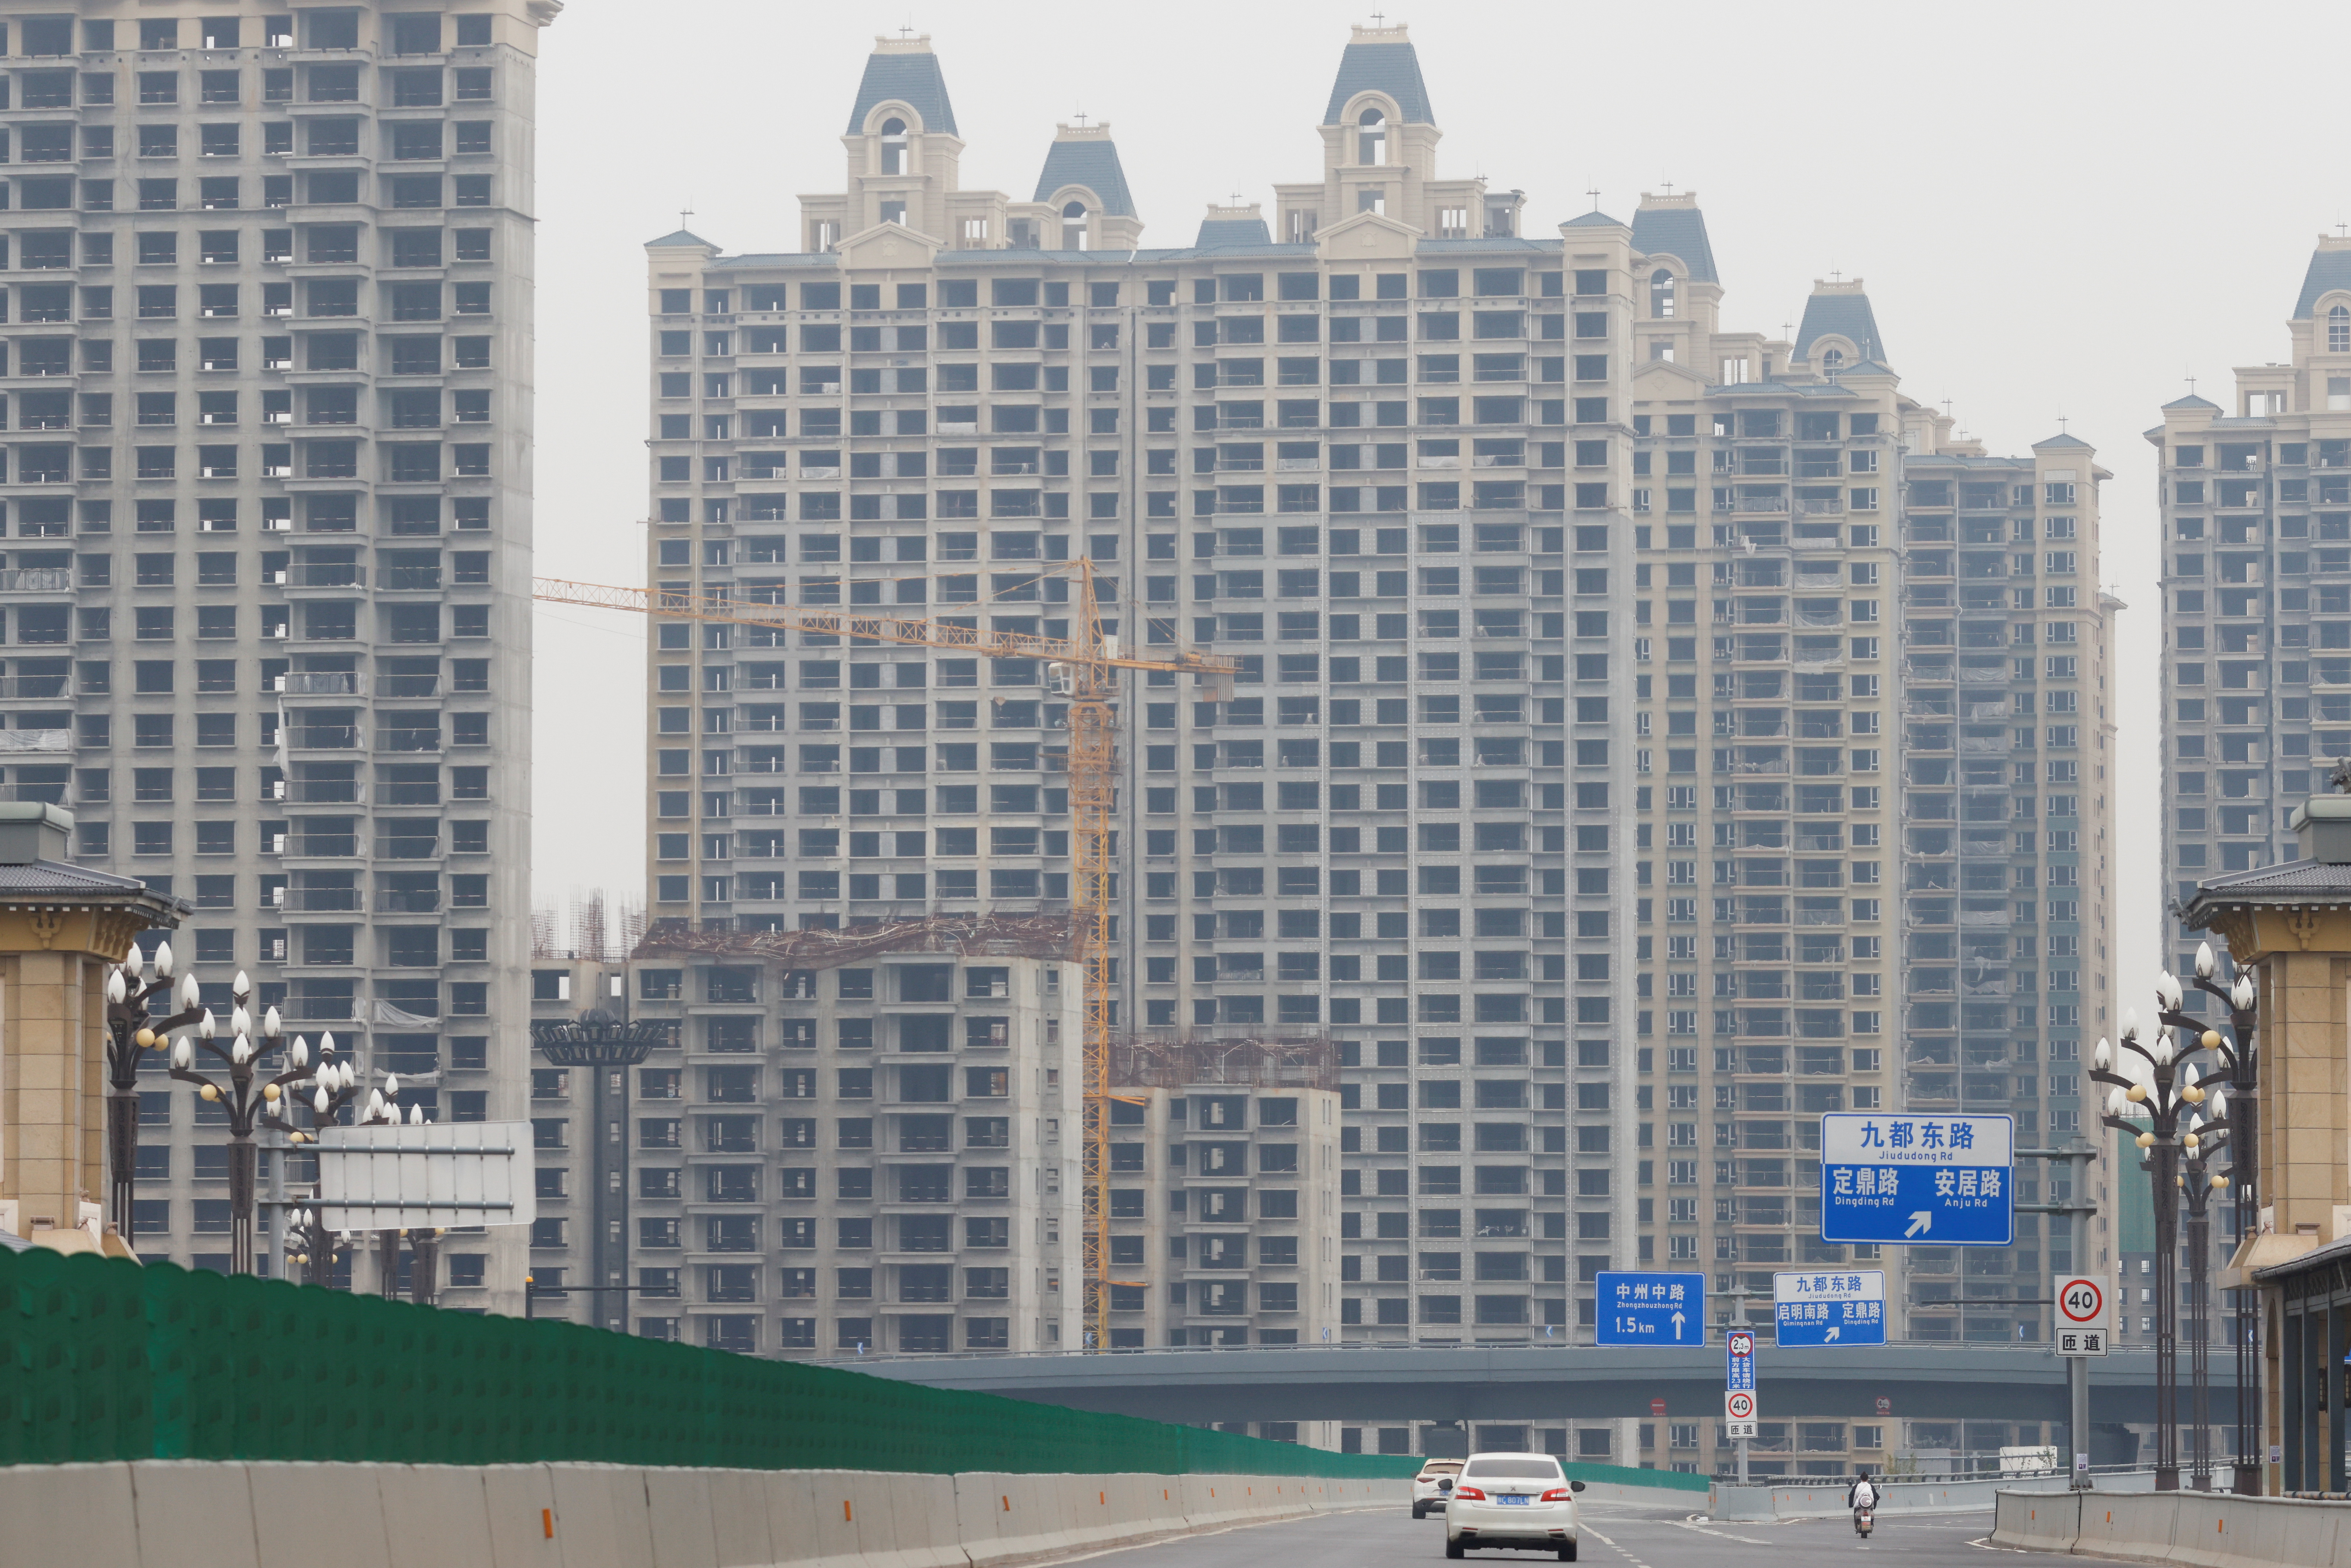 Evergrande Oasis housing complex developed by Evergrande Group, in Luoyang